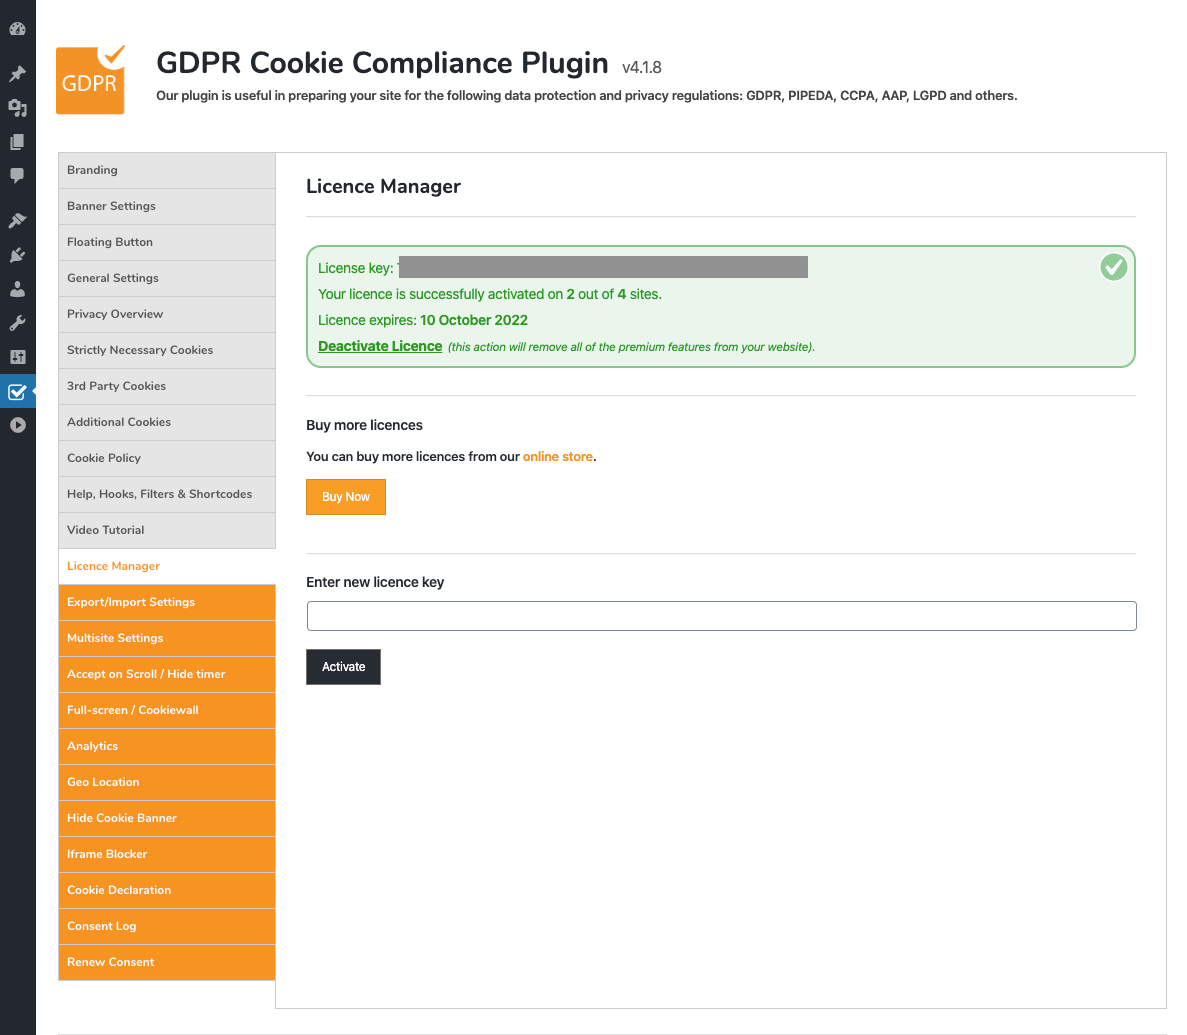 GDPR Cookie Compliance - Admin - 3rd Party Cookies (GA Example Head)